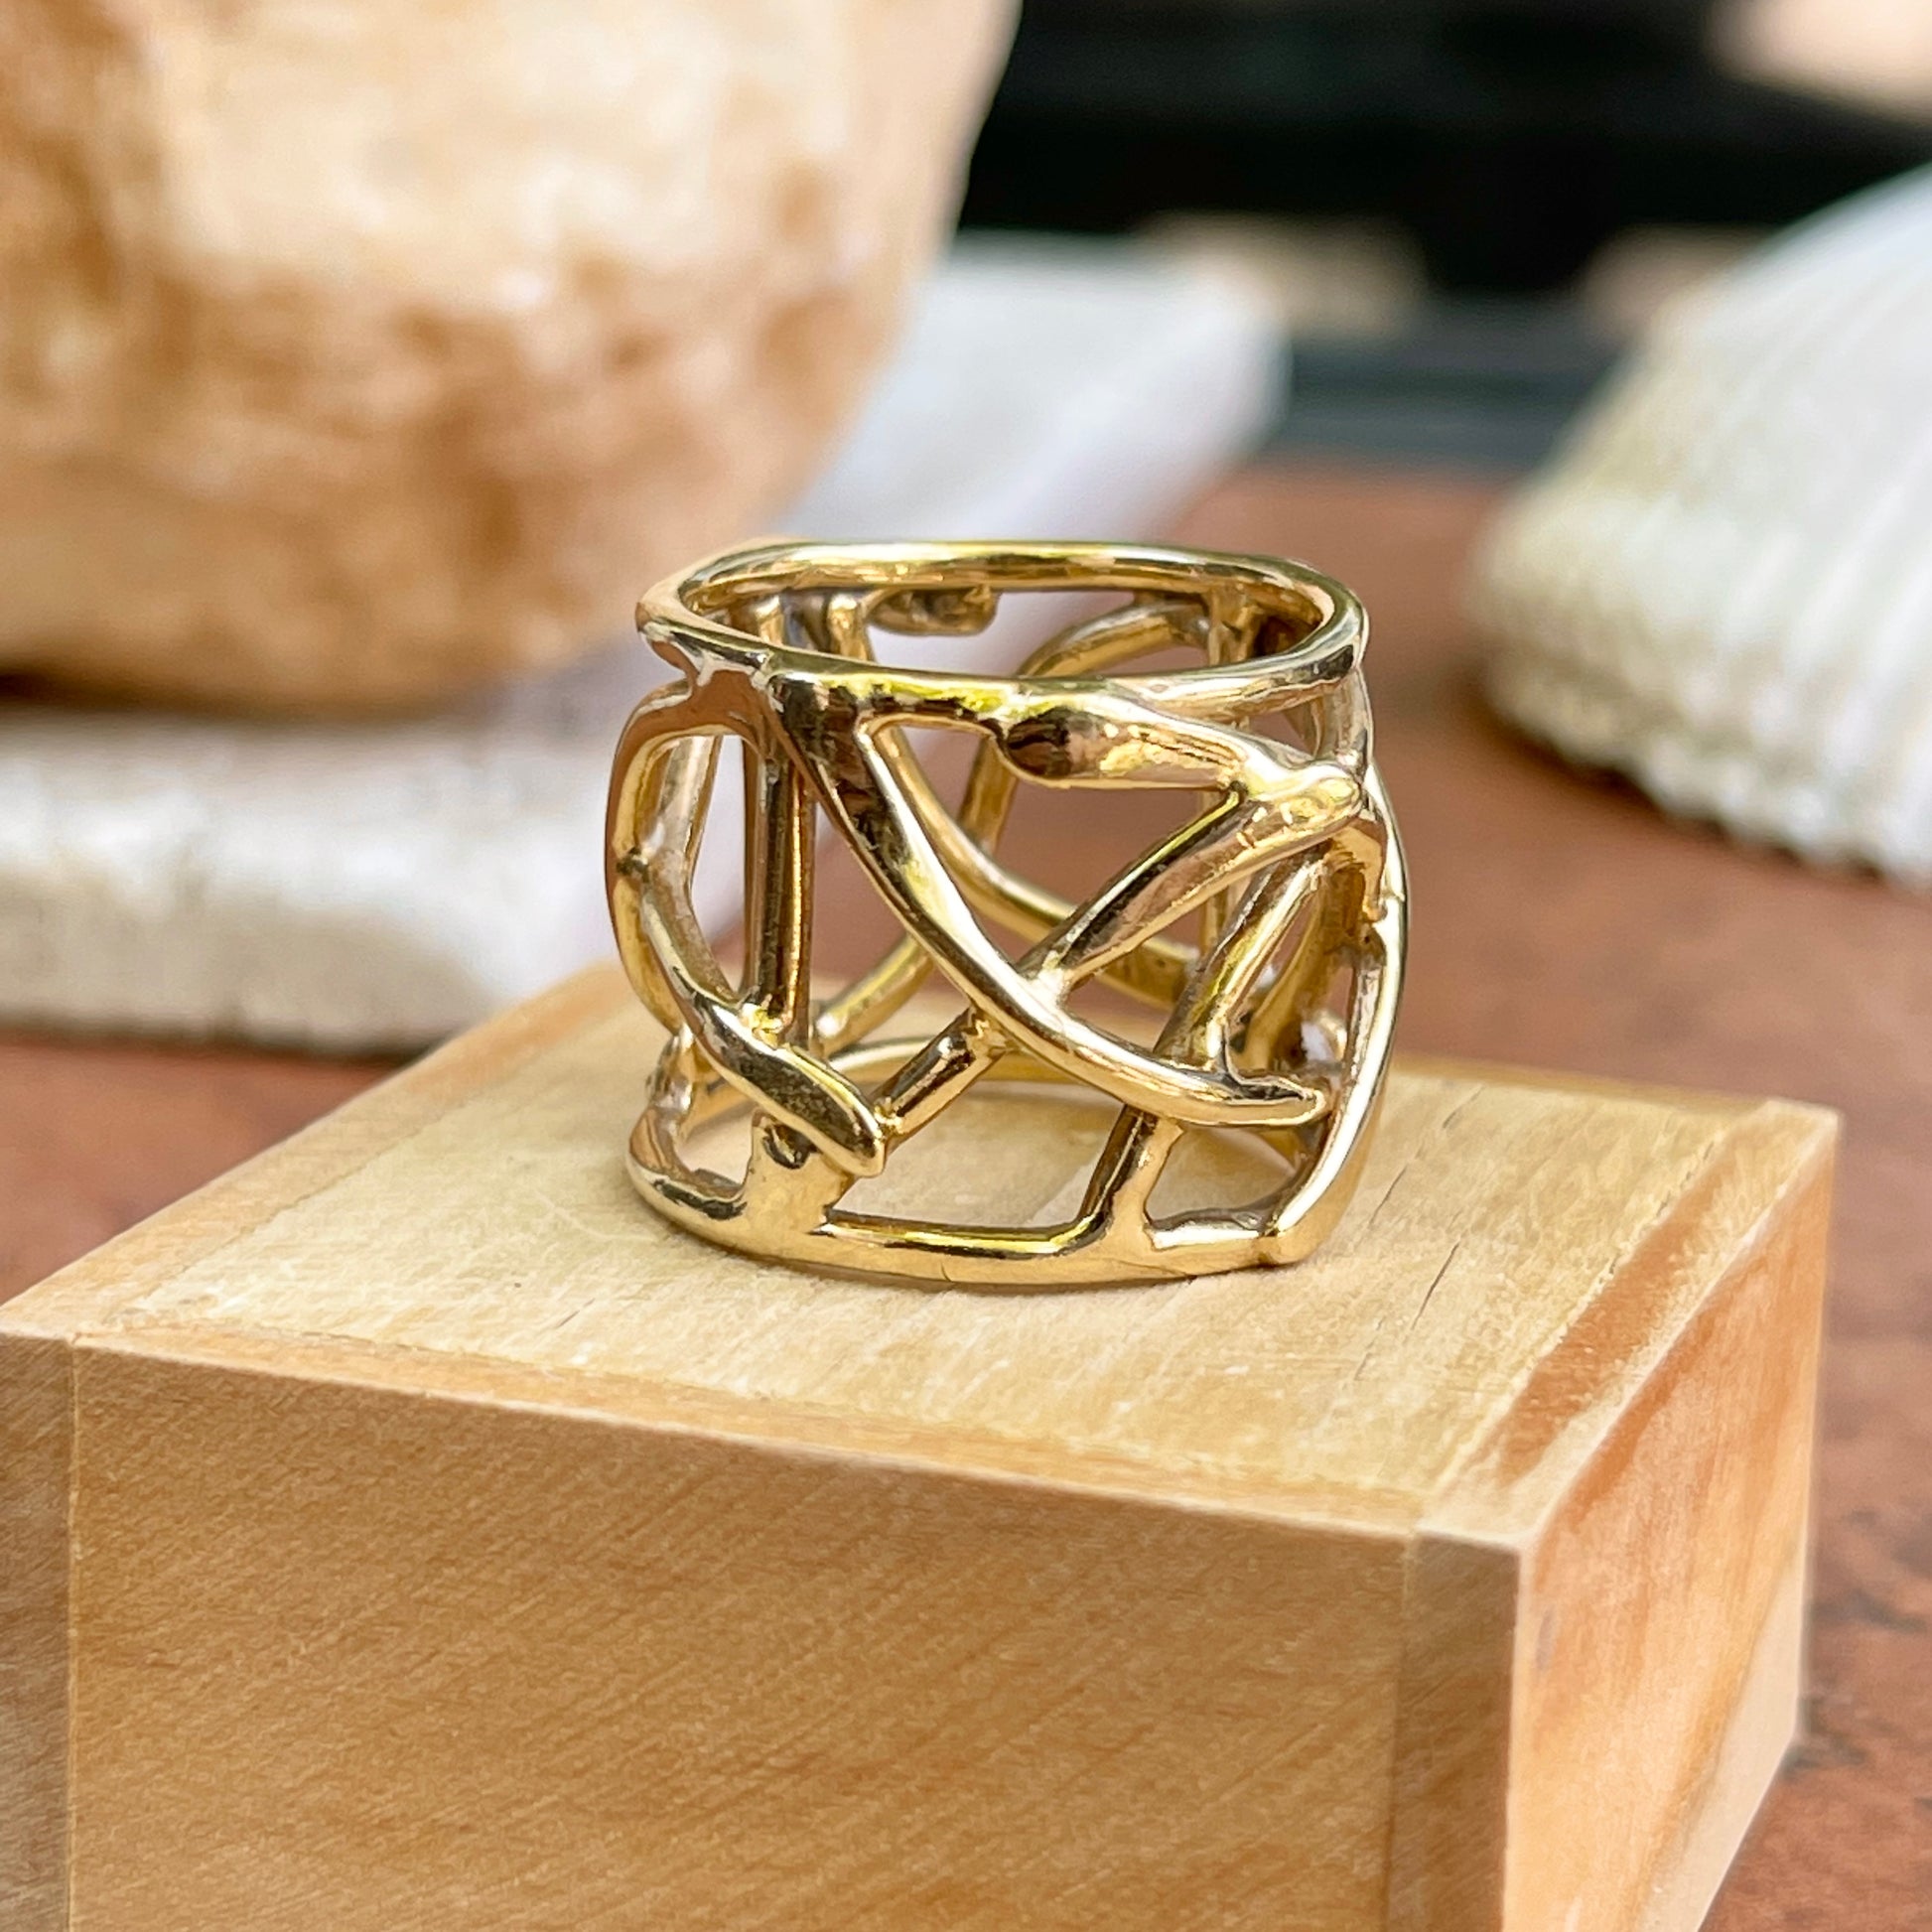 "The Sharona" 14KT Yellow Gold Wide Artistic Design Cigar Band Ring - LSJ